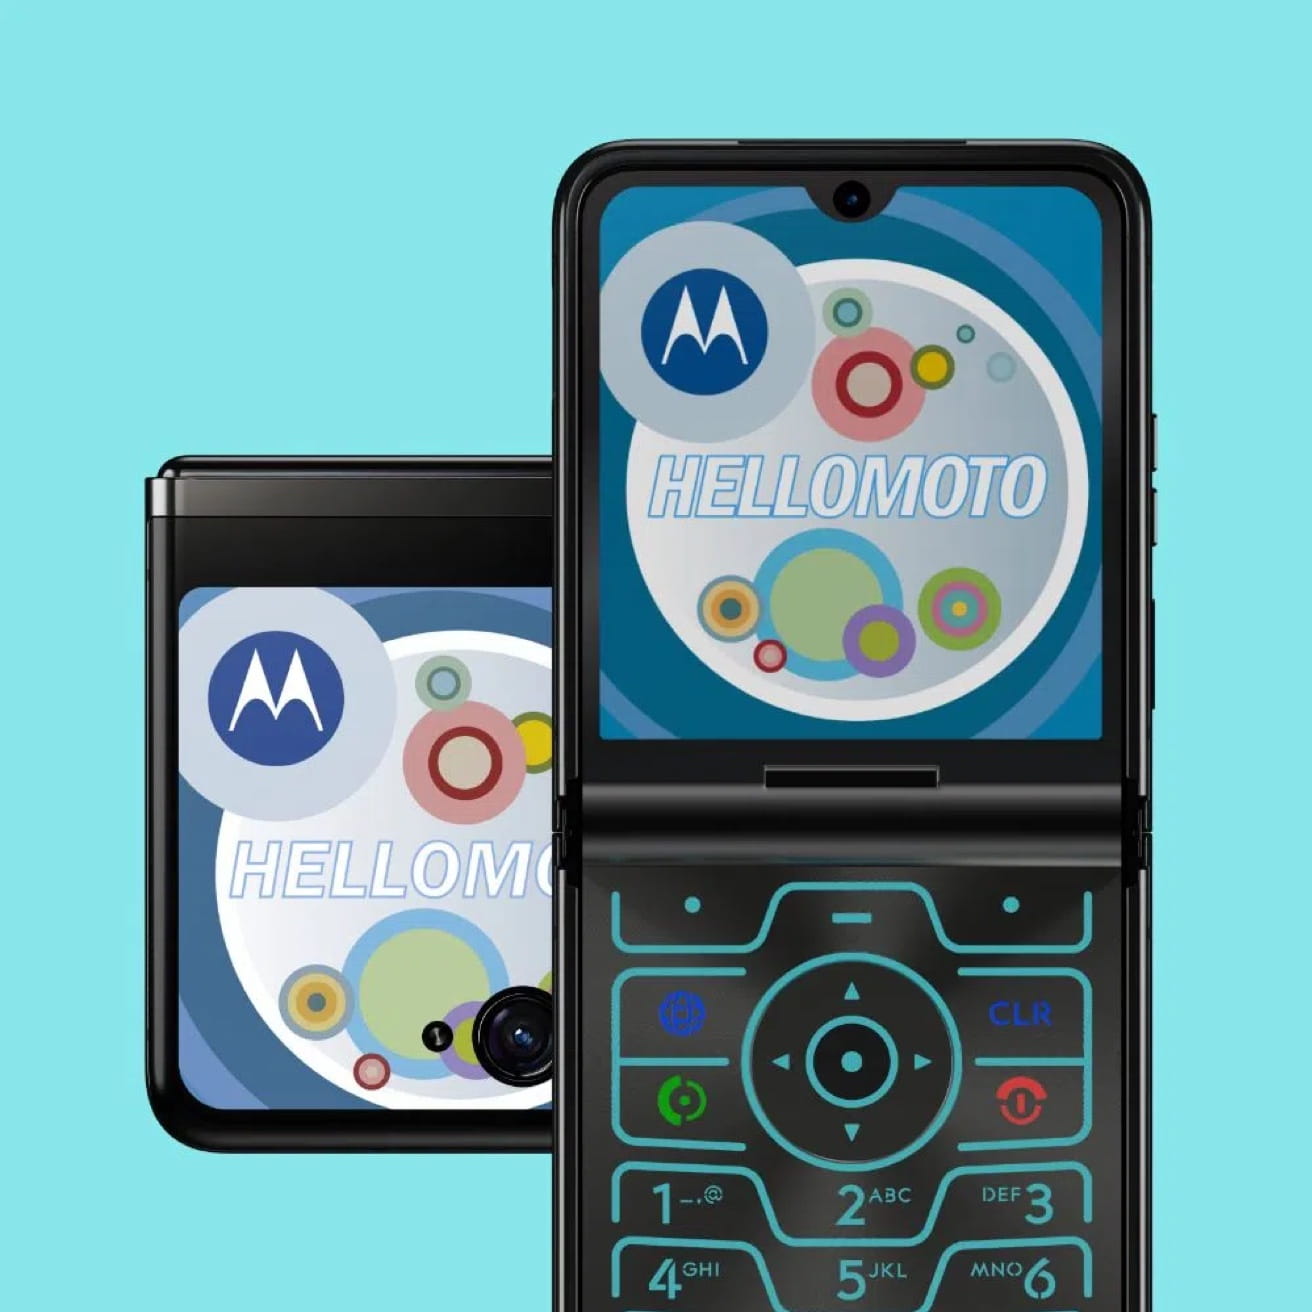 A depiction of the original motorola razr user interface used in 2004.